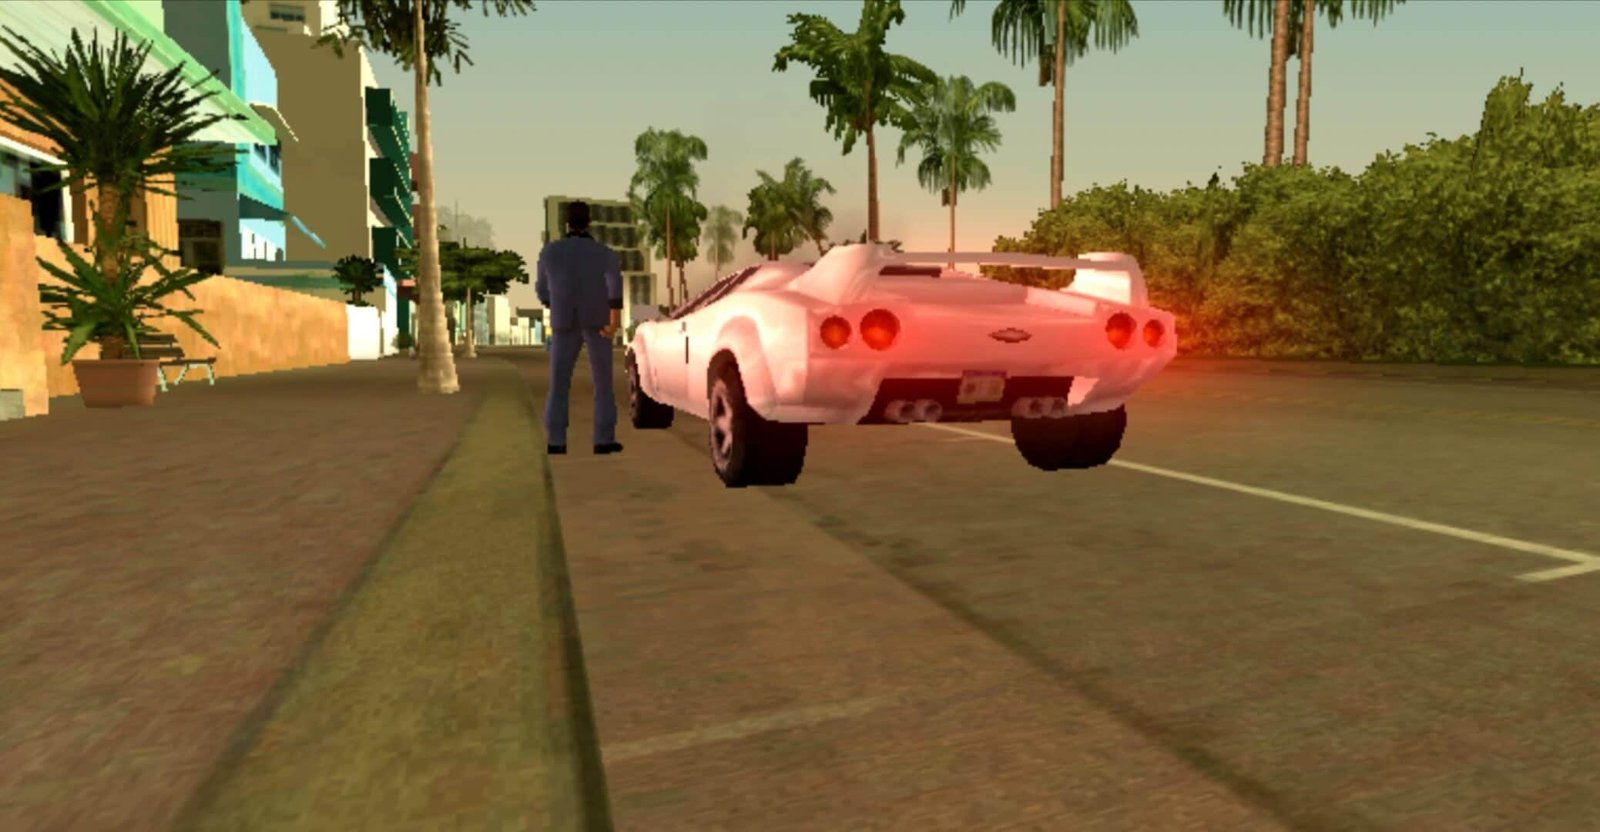 gta vice city apk file download for android